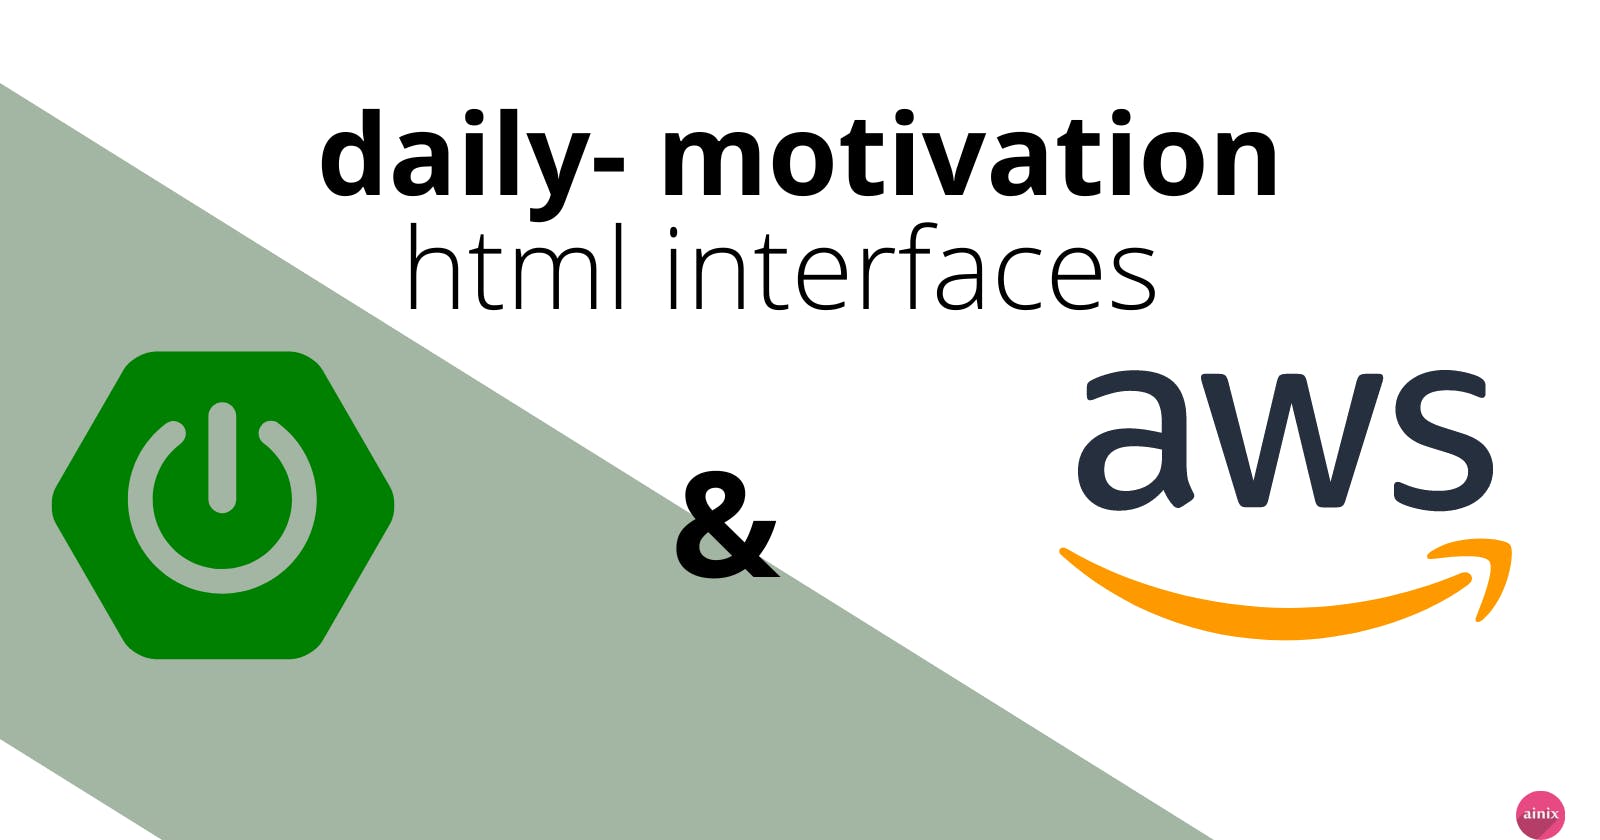 Daily-motivation: html interfaces